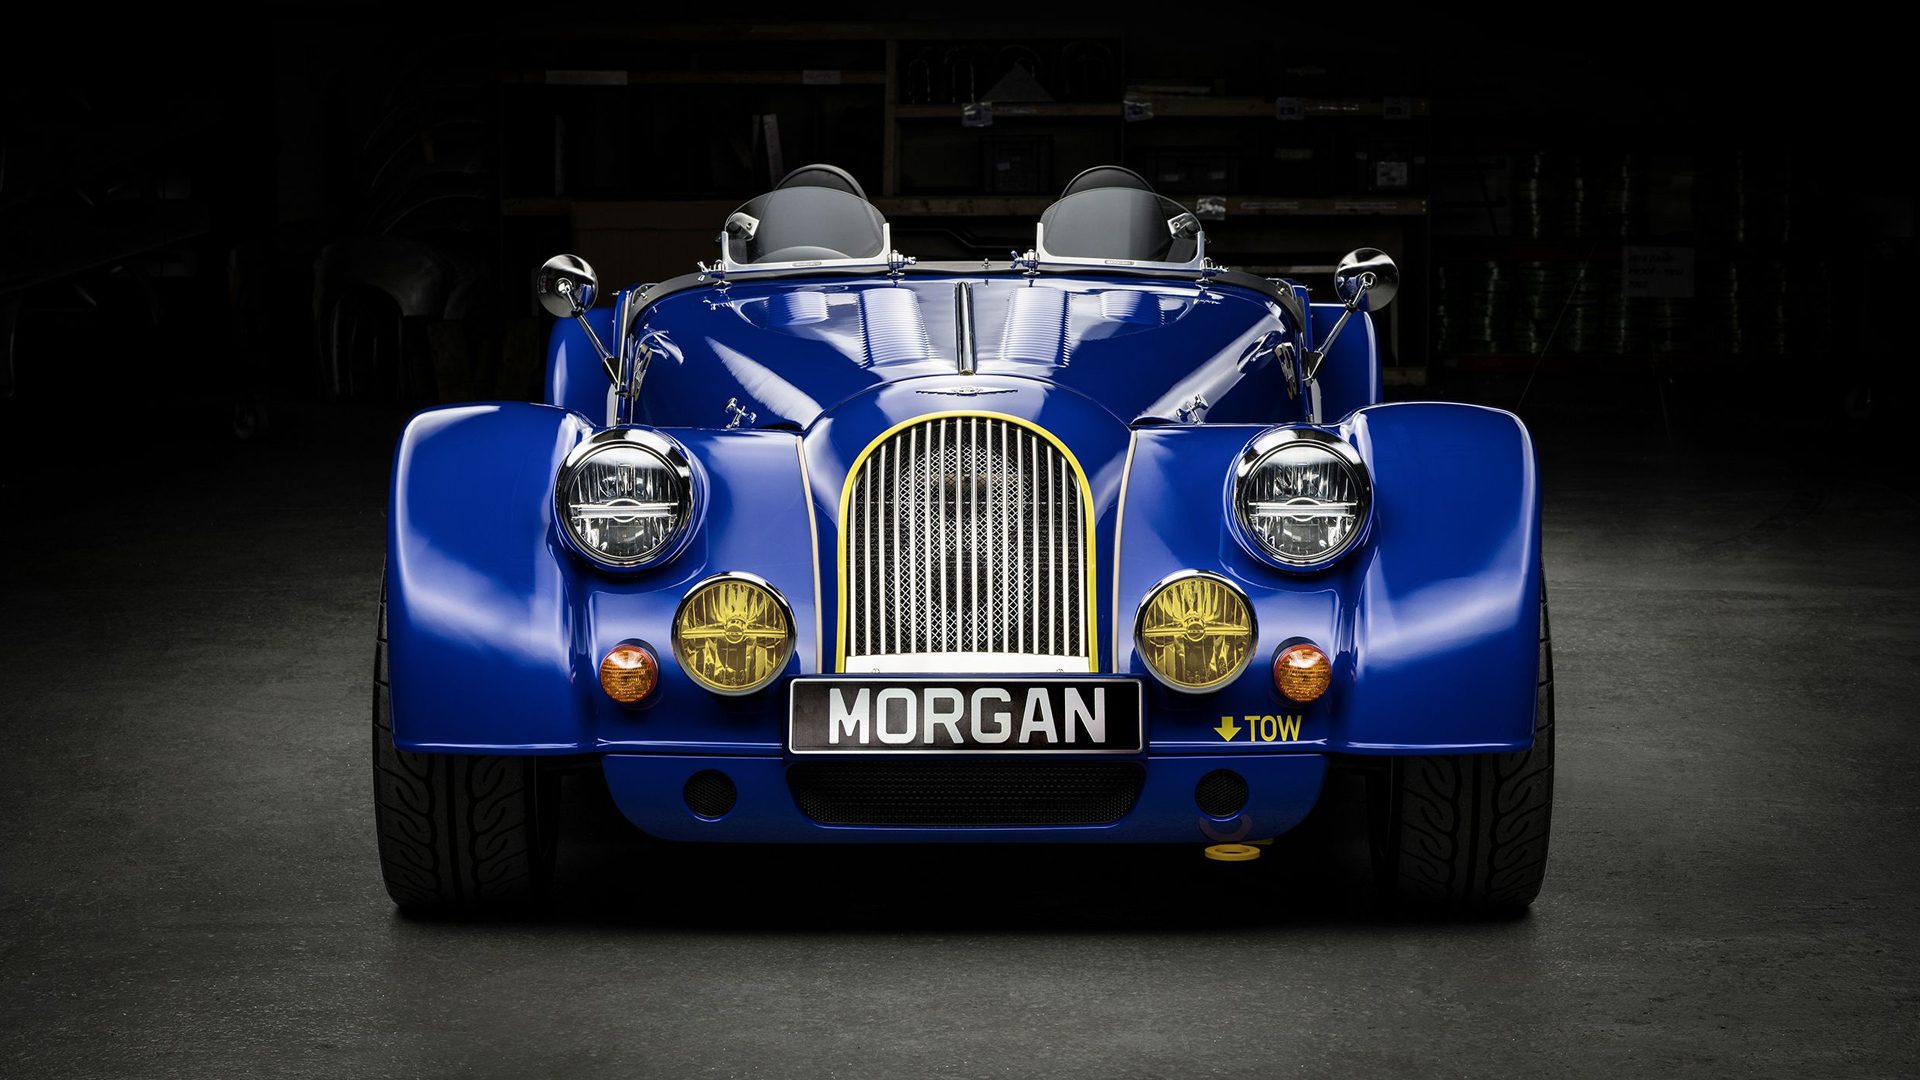 Morgan Marks the End of Its V8 Era With Special Editions of